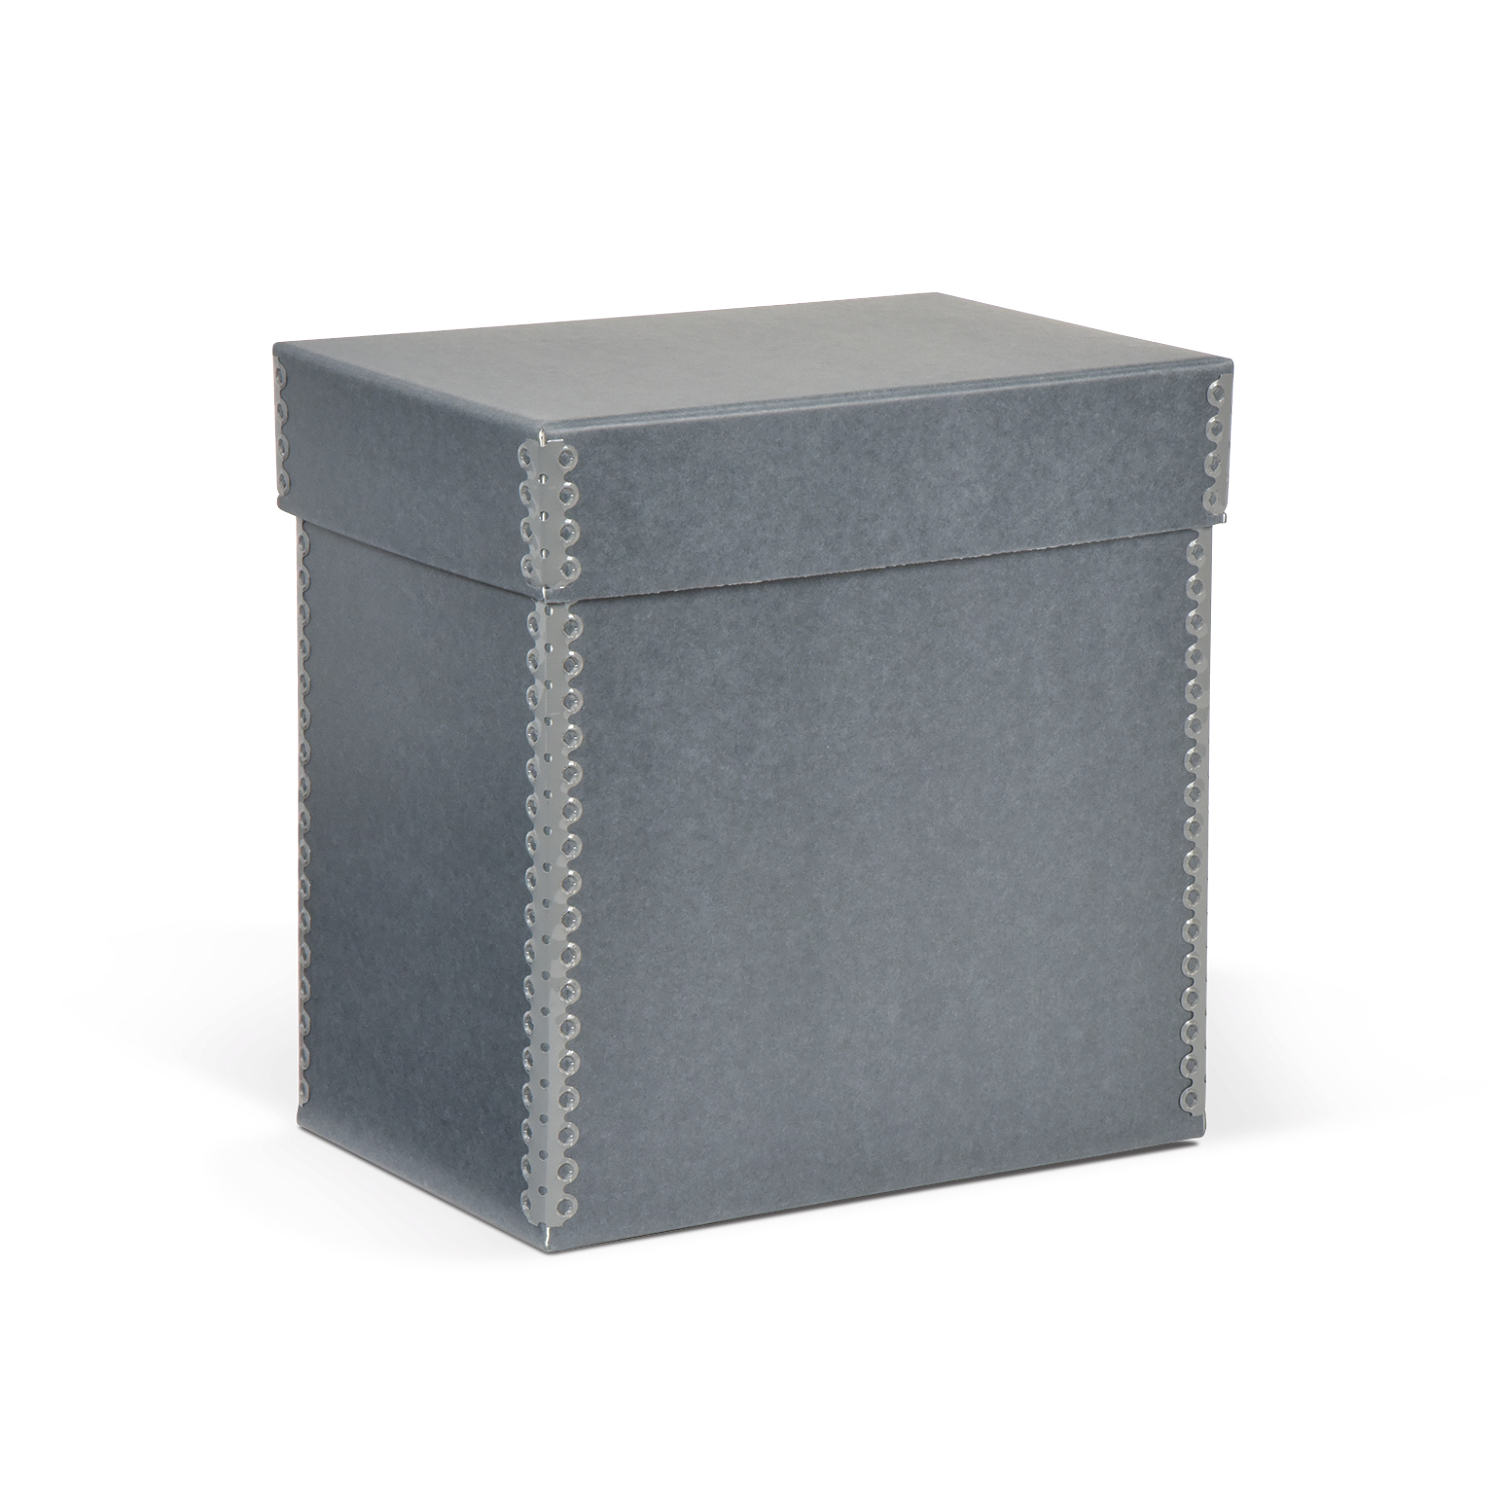 Gaylord Archival® Blue Nesting Storage Boxes, Record Storage Cartons, Document Preservation, Preservation